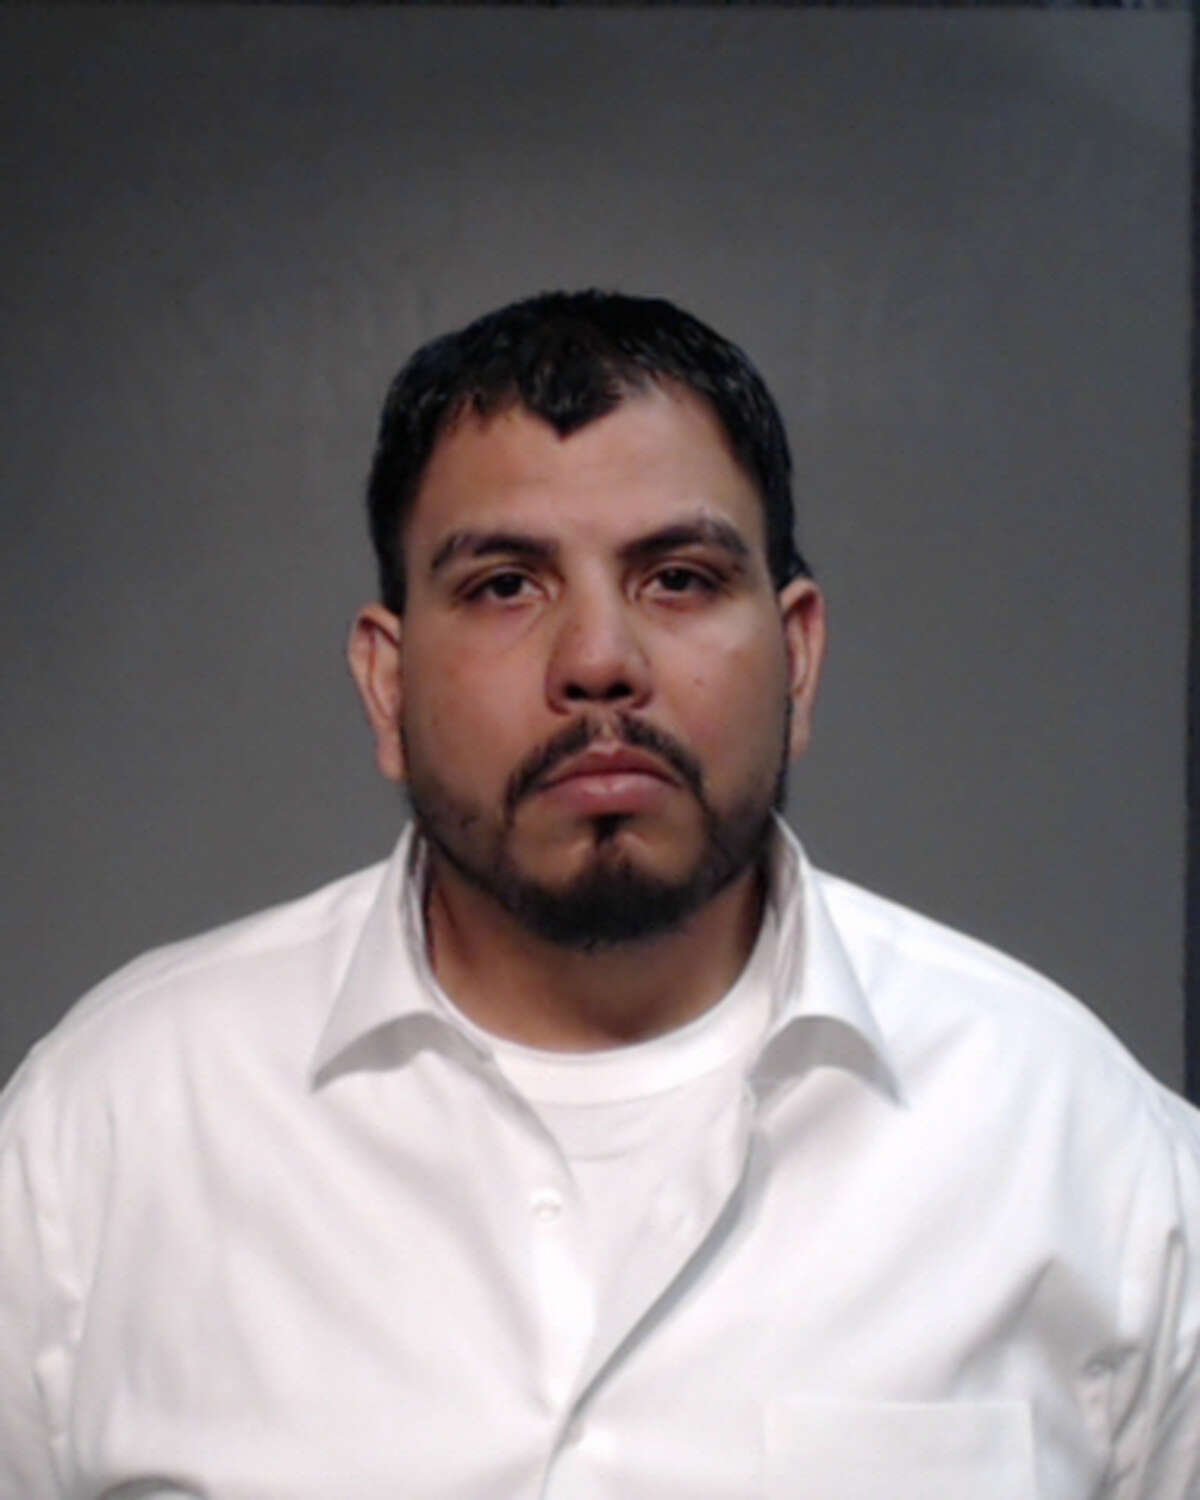 Angel de la Mora, 32, pleaded guilty to two counts of official oppression Monday.